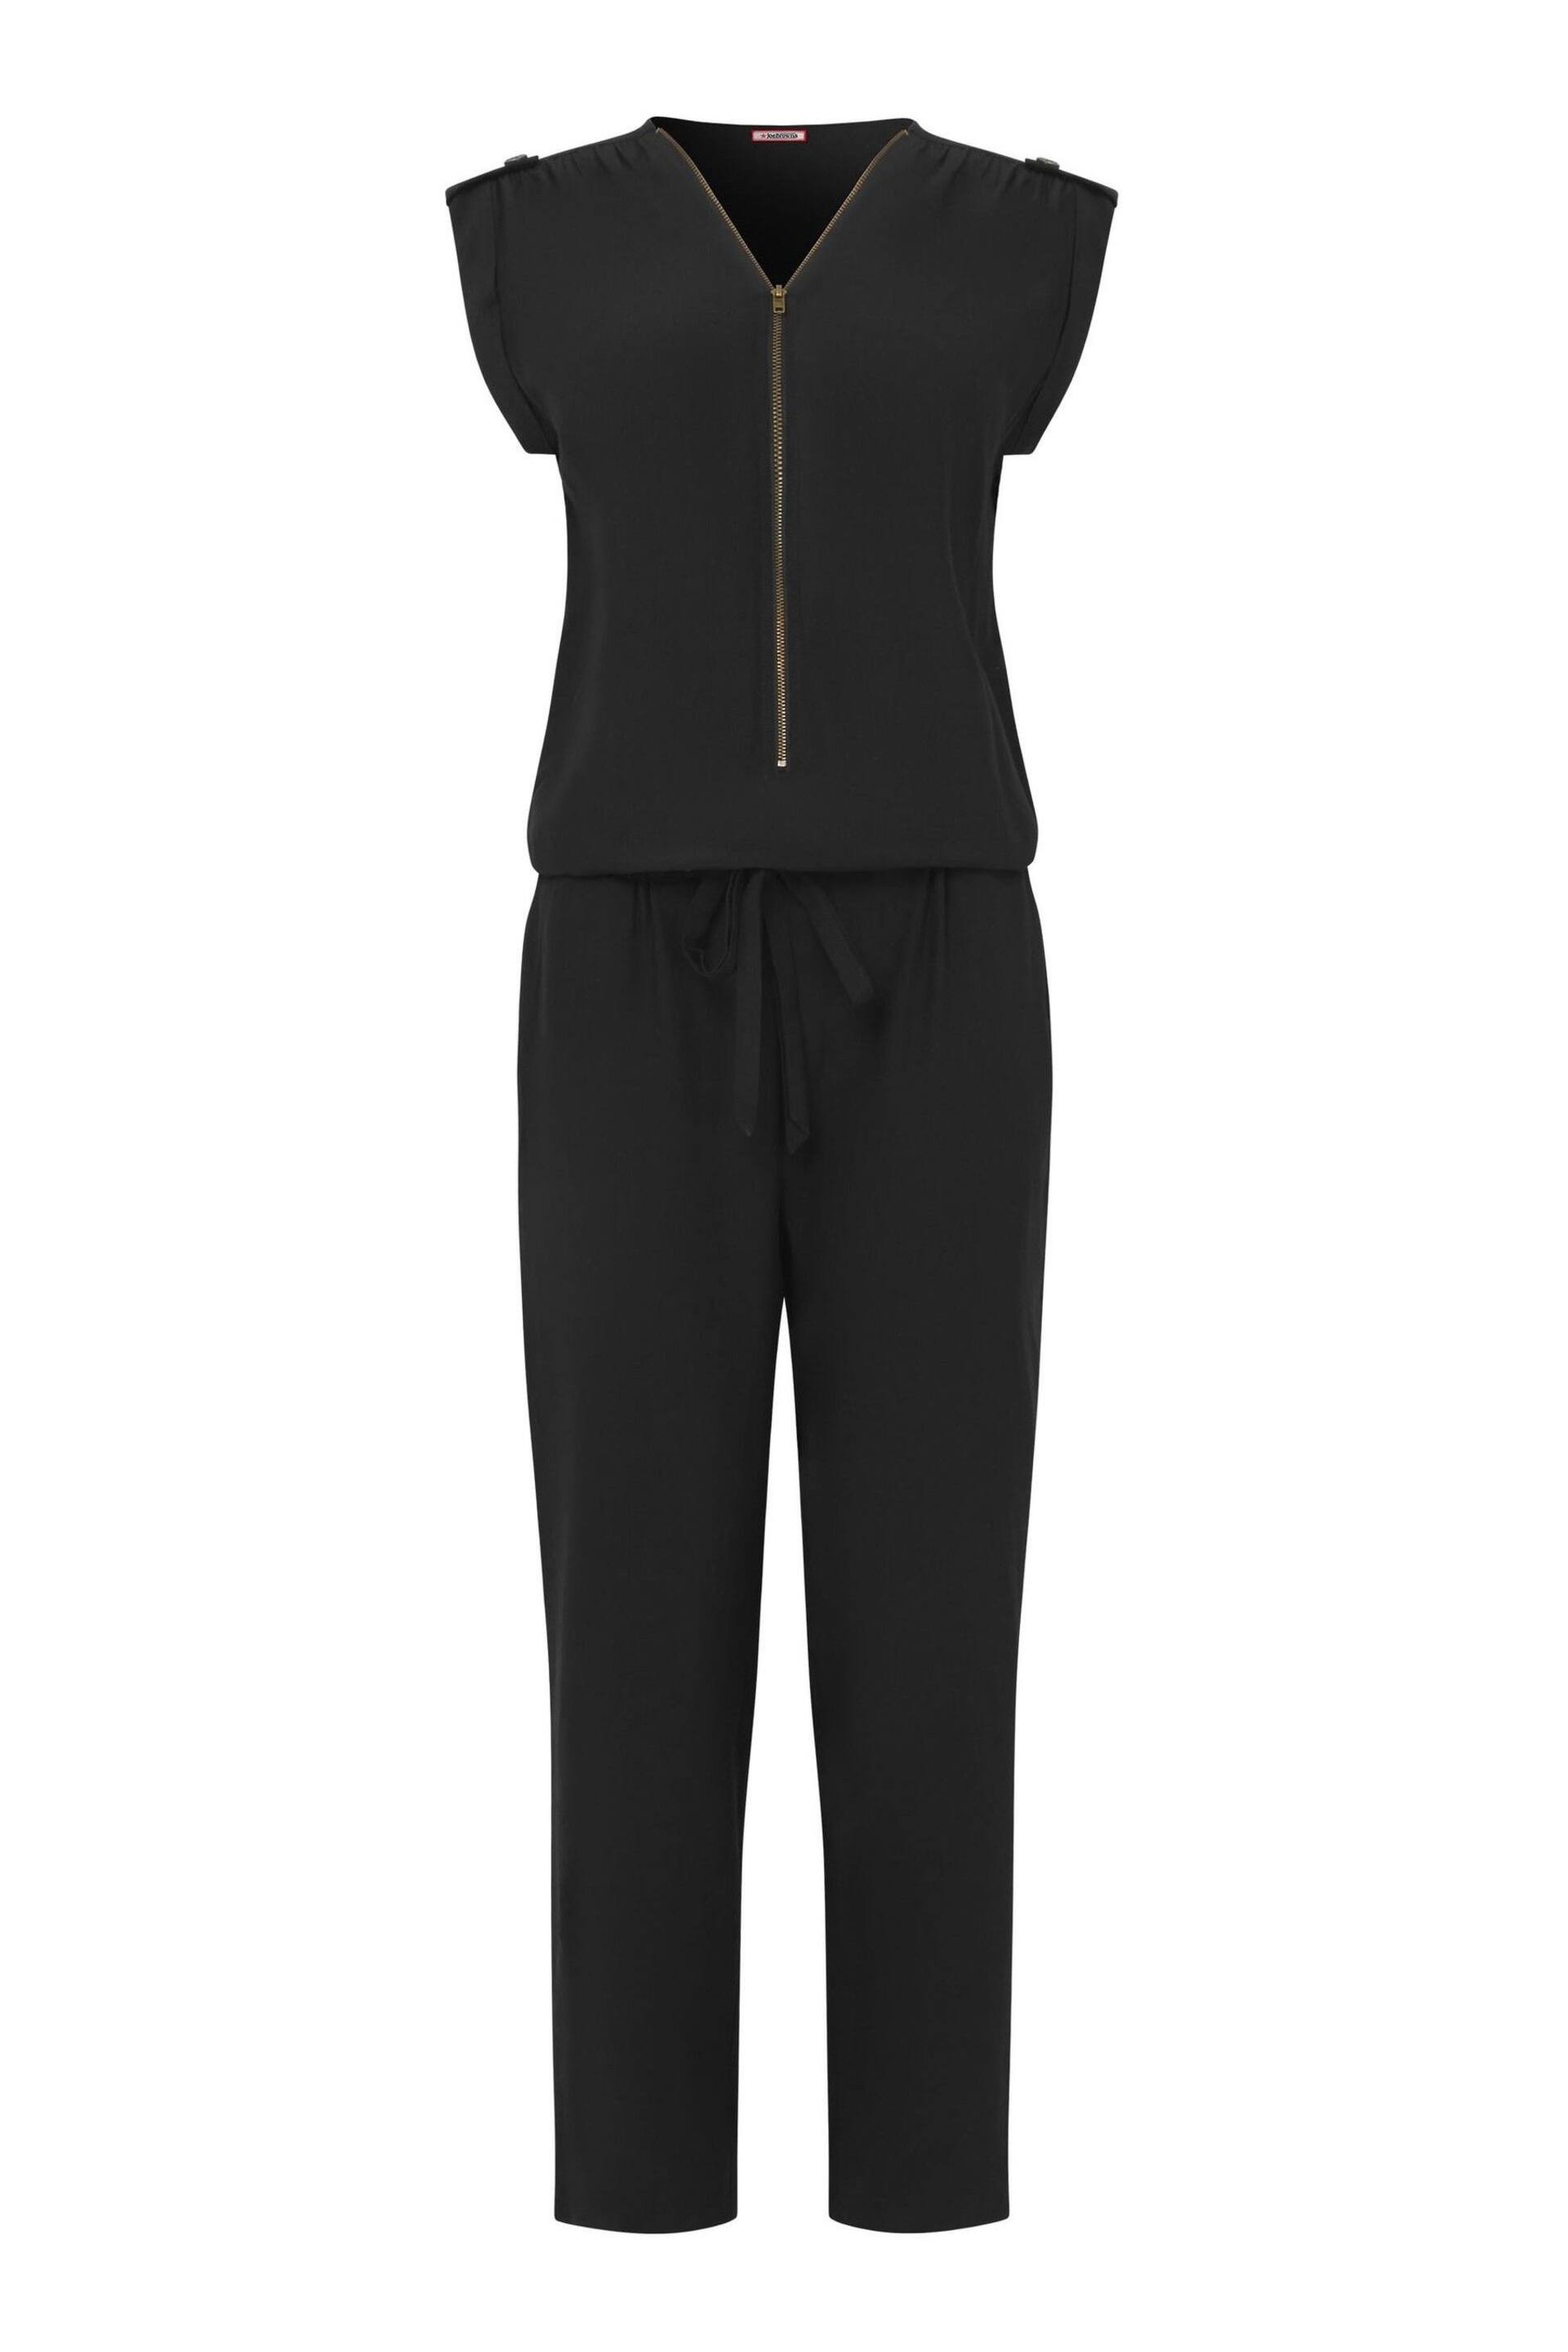 Joe Browns Black Relaxed Fit Zip Front Jumpsuit - Image 6 of 6